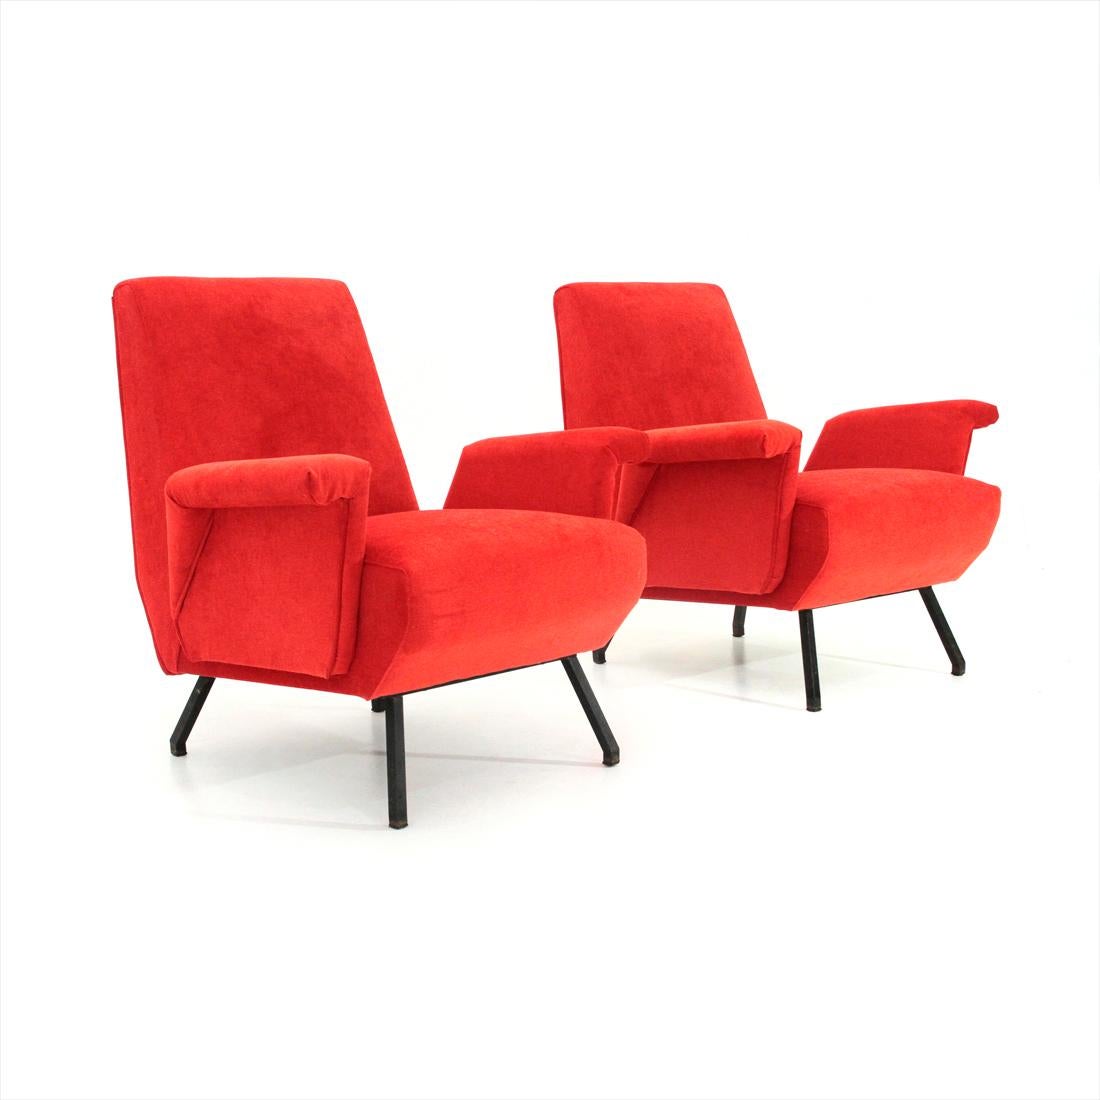 Pair of Italian-made armchairs produced in the 1950s.
Wooden structure padded and lined with new red velvet fabric.
Legs in black painted metal.
Good general conditions, some signs due to normal use over time.

Dimensions: Length 73cm - Depth